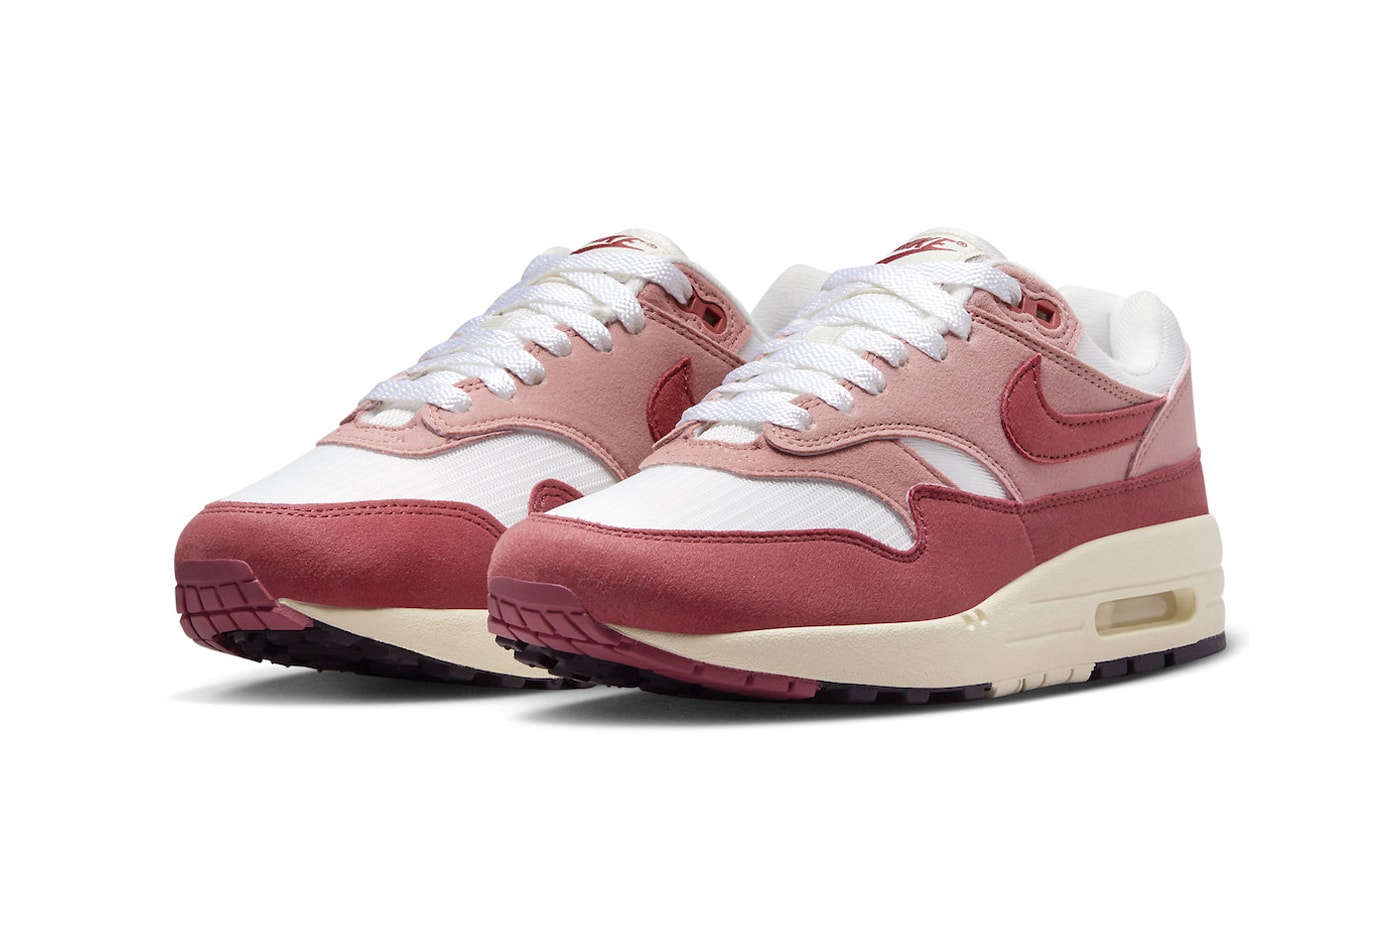 Official Look at Nike Air Max 1 "Red Stardust" Sail/Cedar-Red Stardust-Coconut Milk swoosh DZ2628-103 fall november release